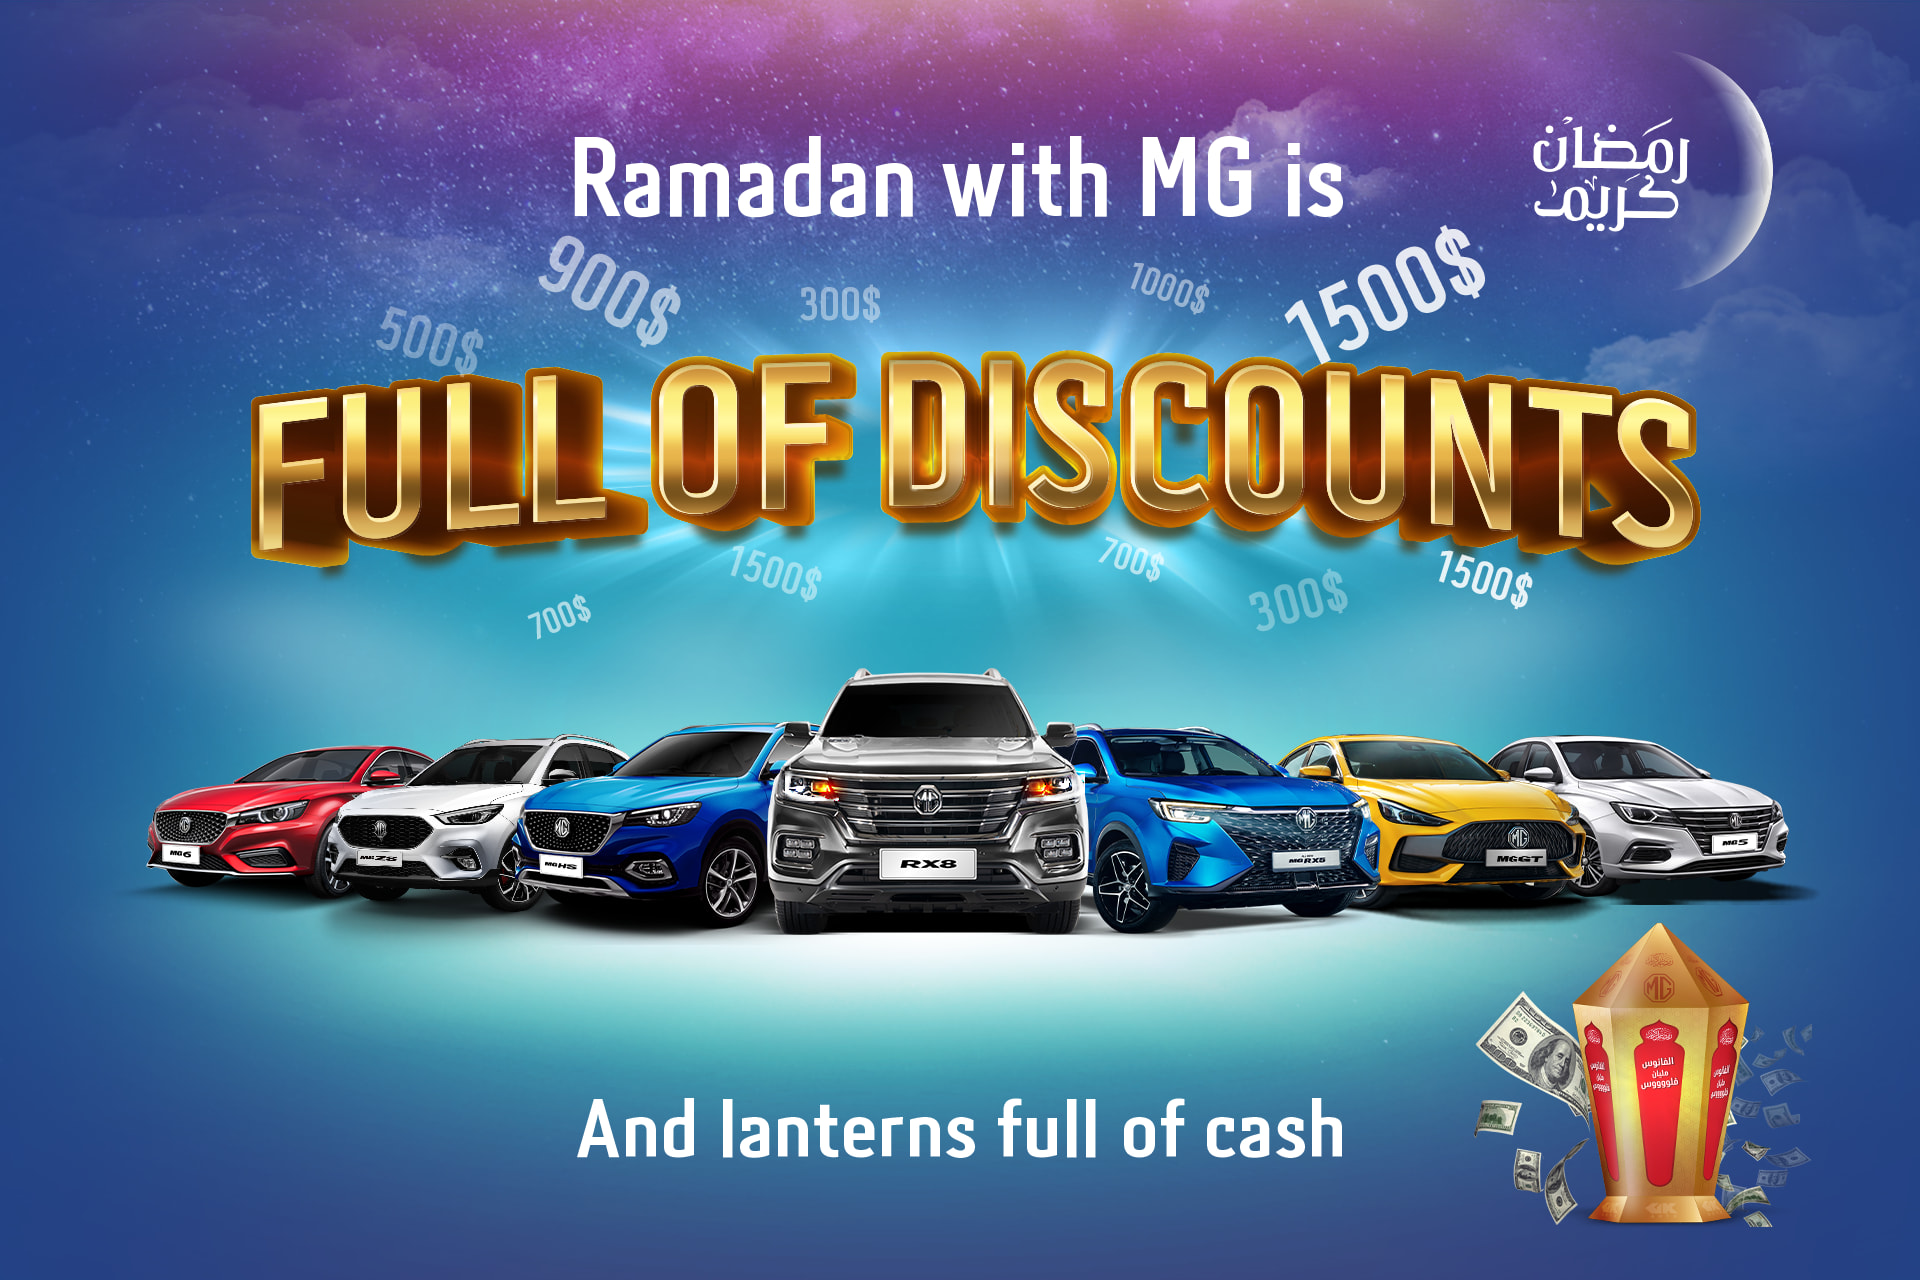 Ramadan with MG is full of discounts!